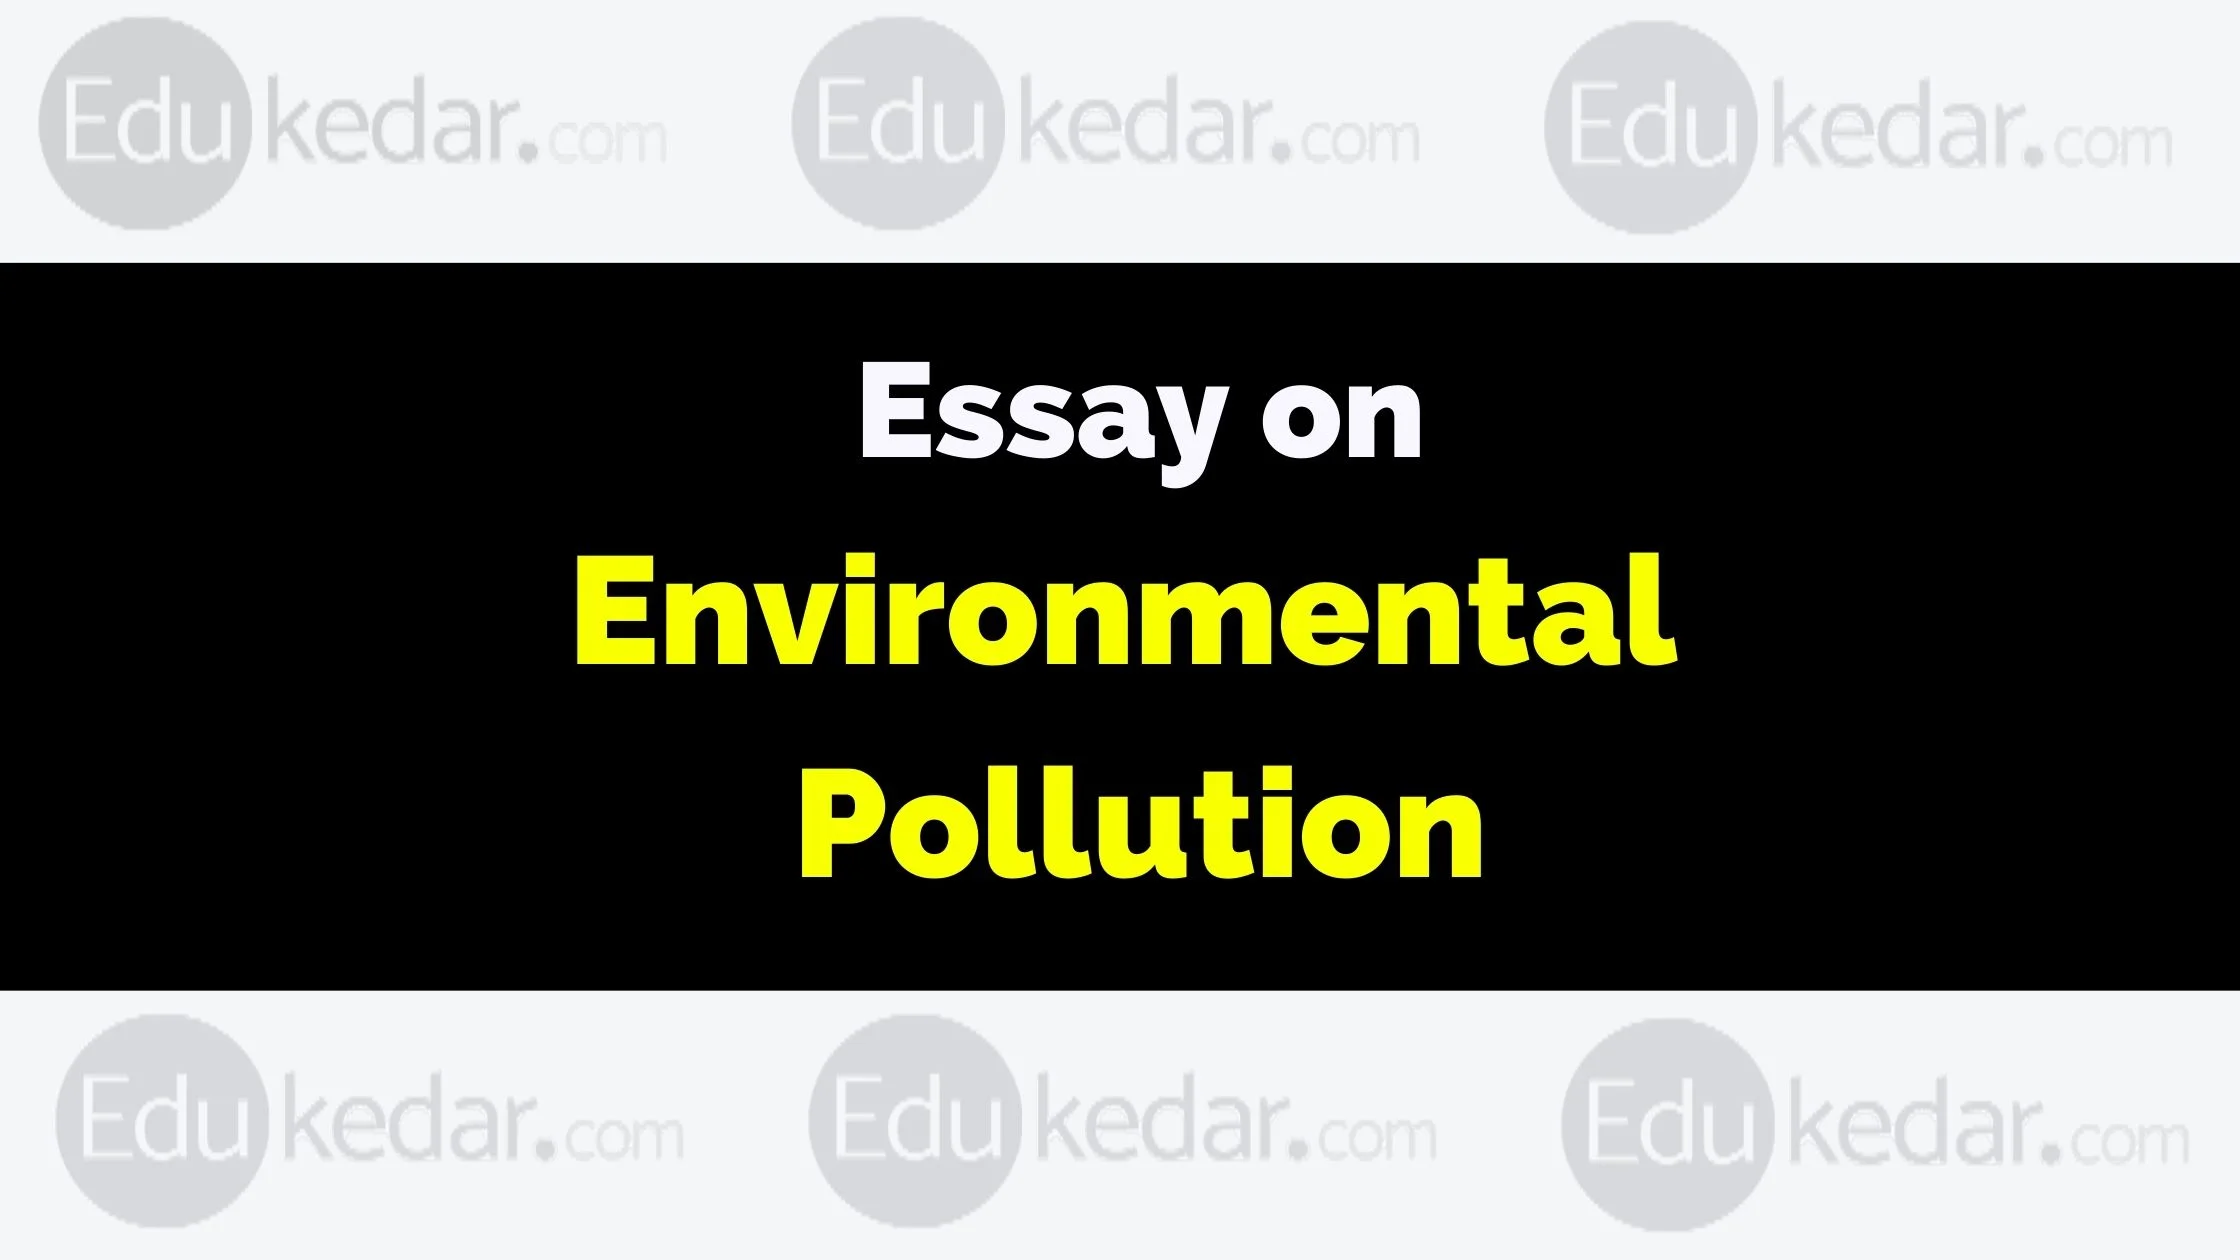 essay on environmental pollution in 250 words in english